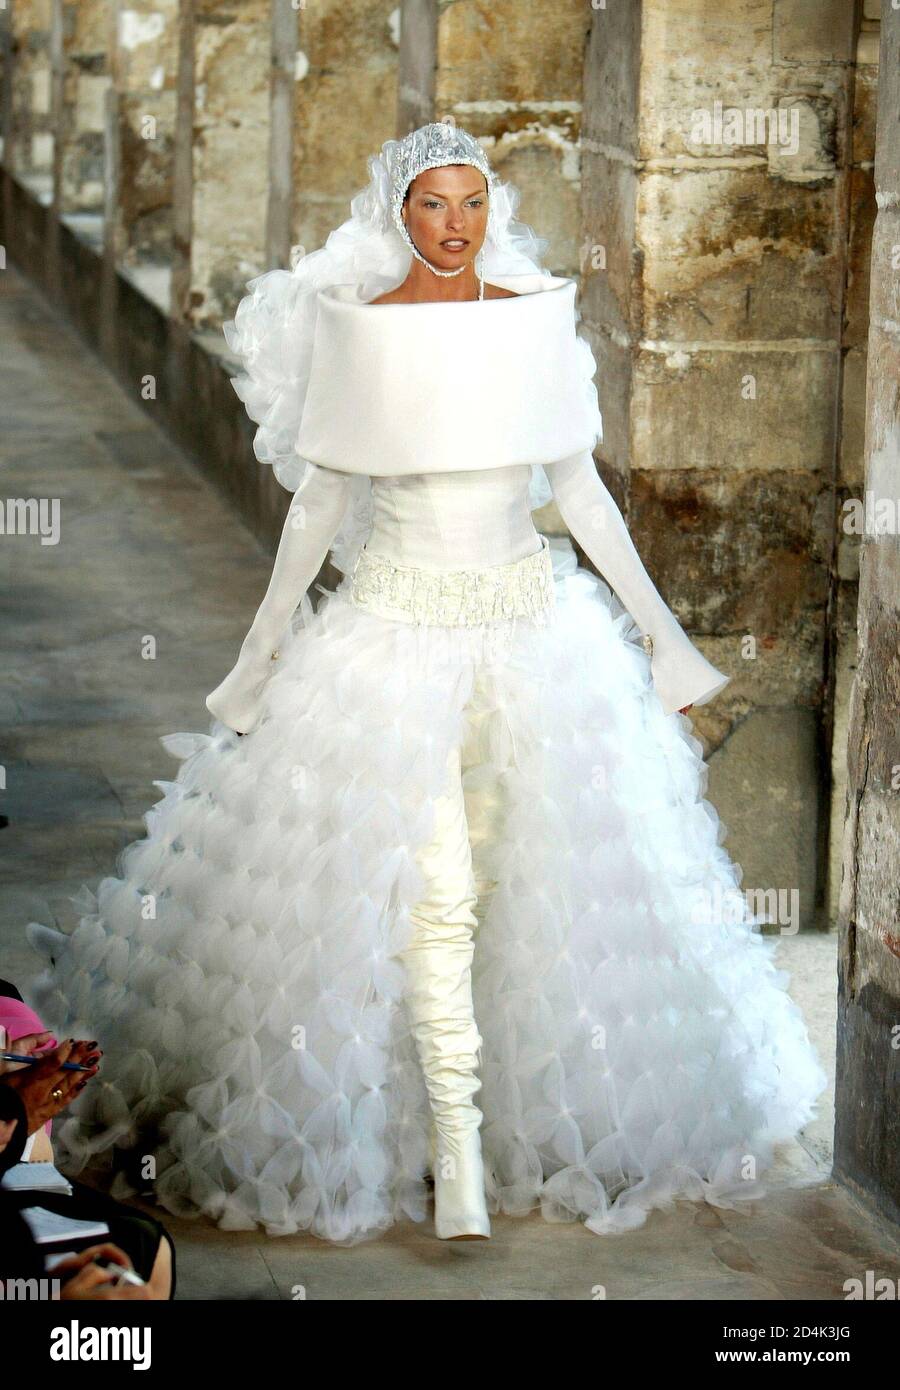 Buy > chanel wedding gown > in stock